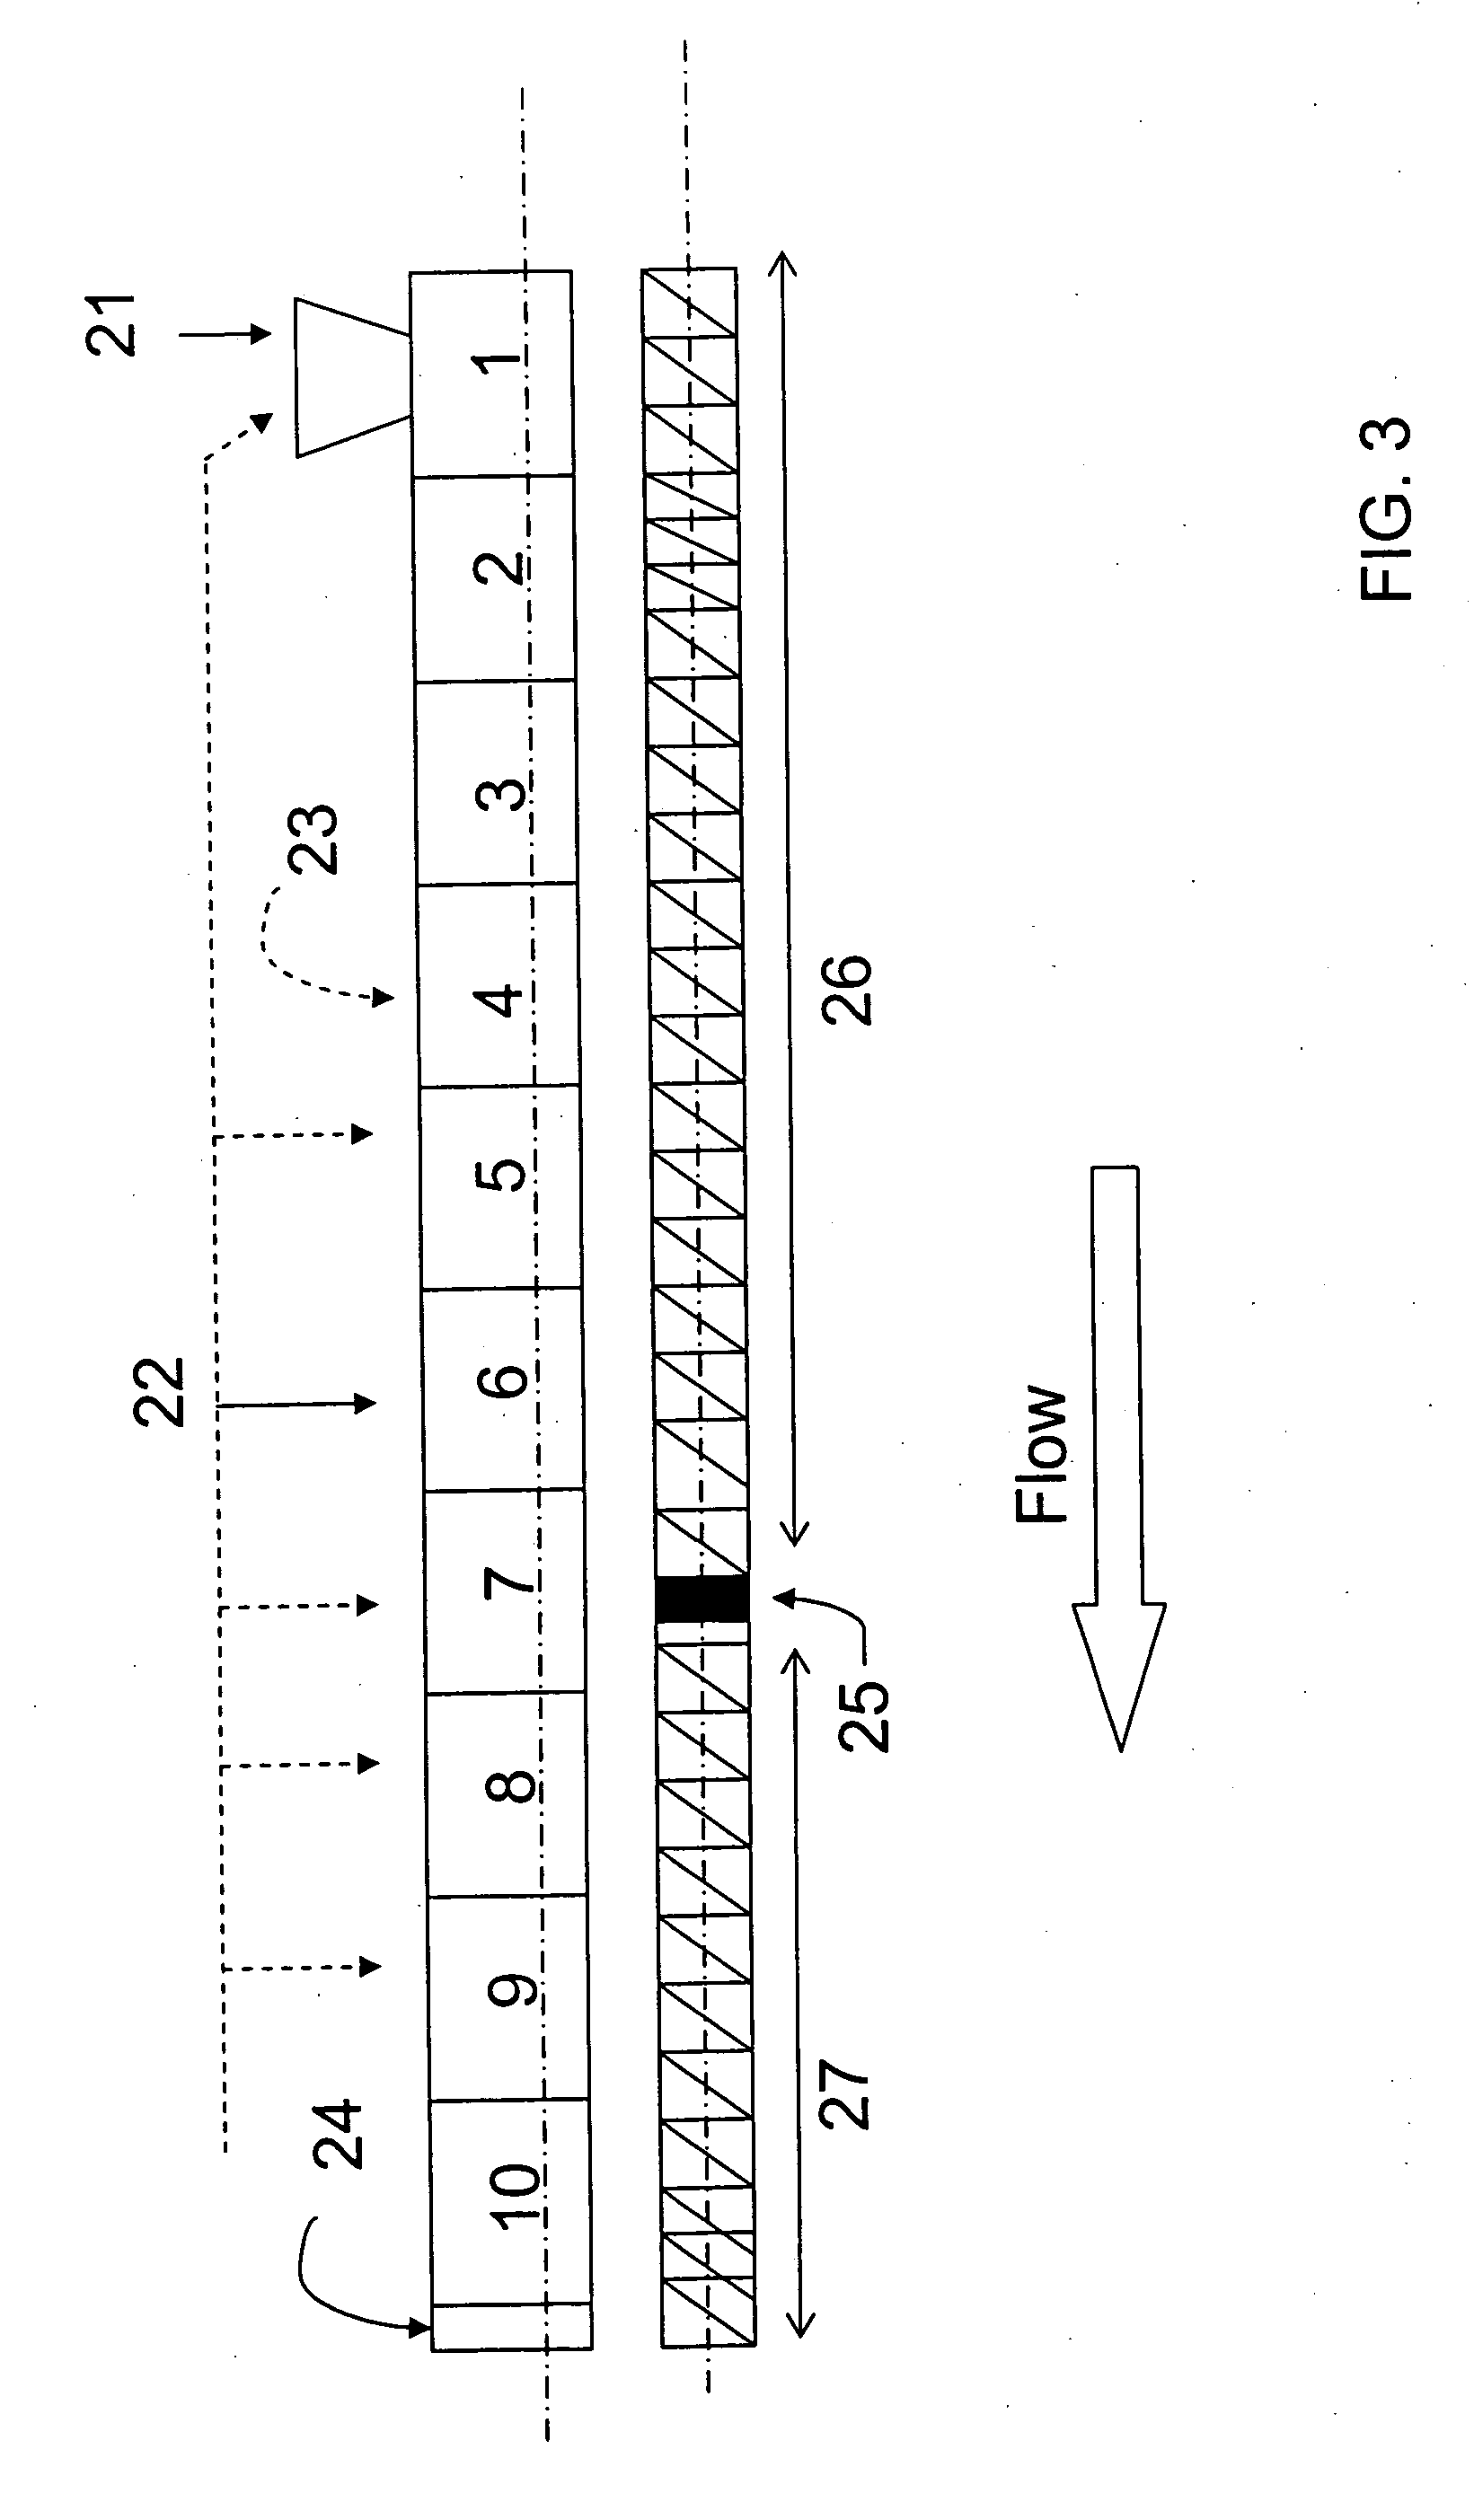 Process for manufacturing a delivery system for active components as part of an edible composition